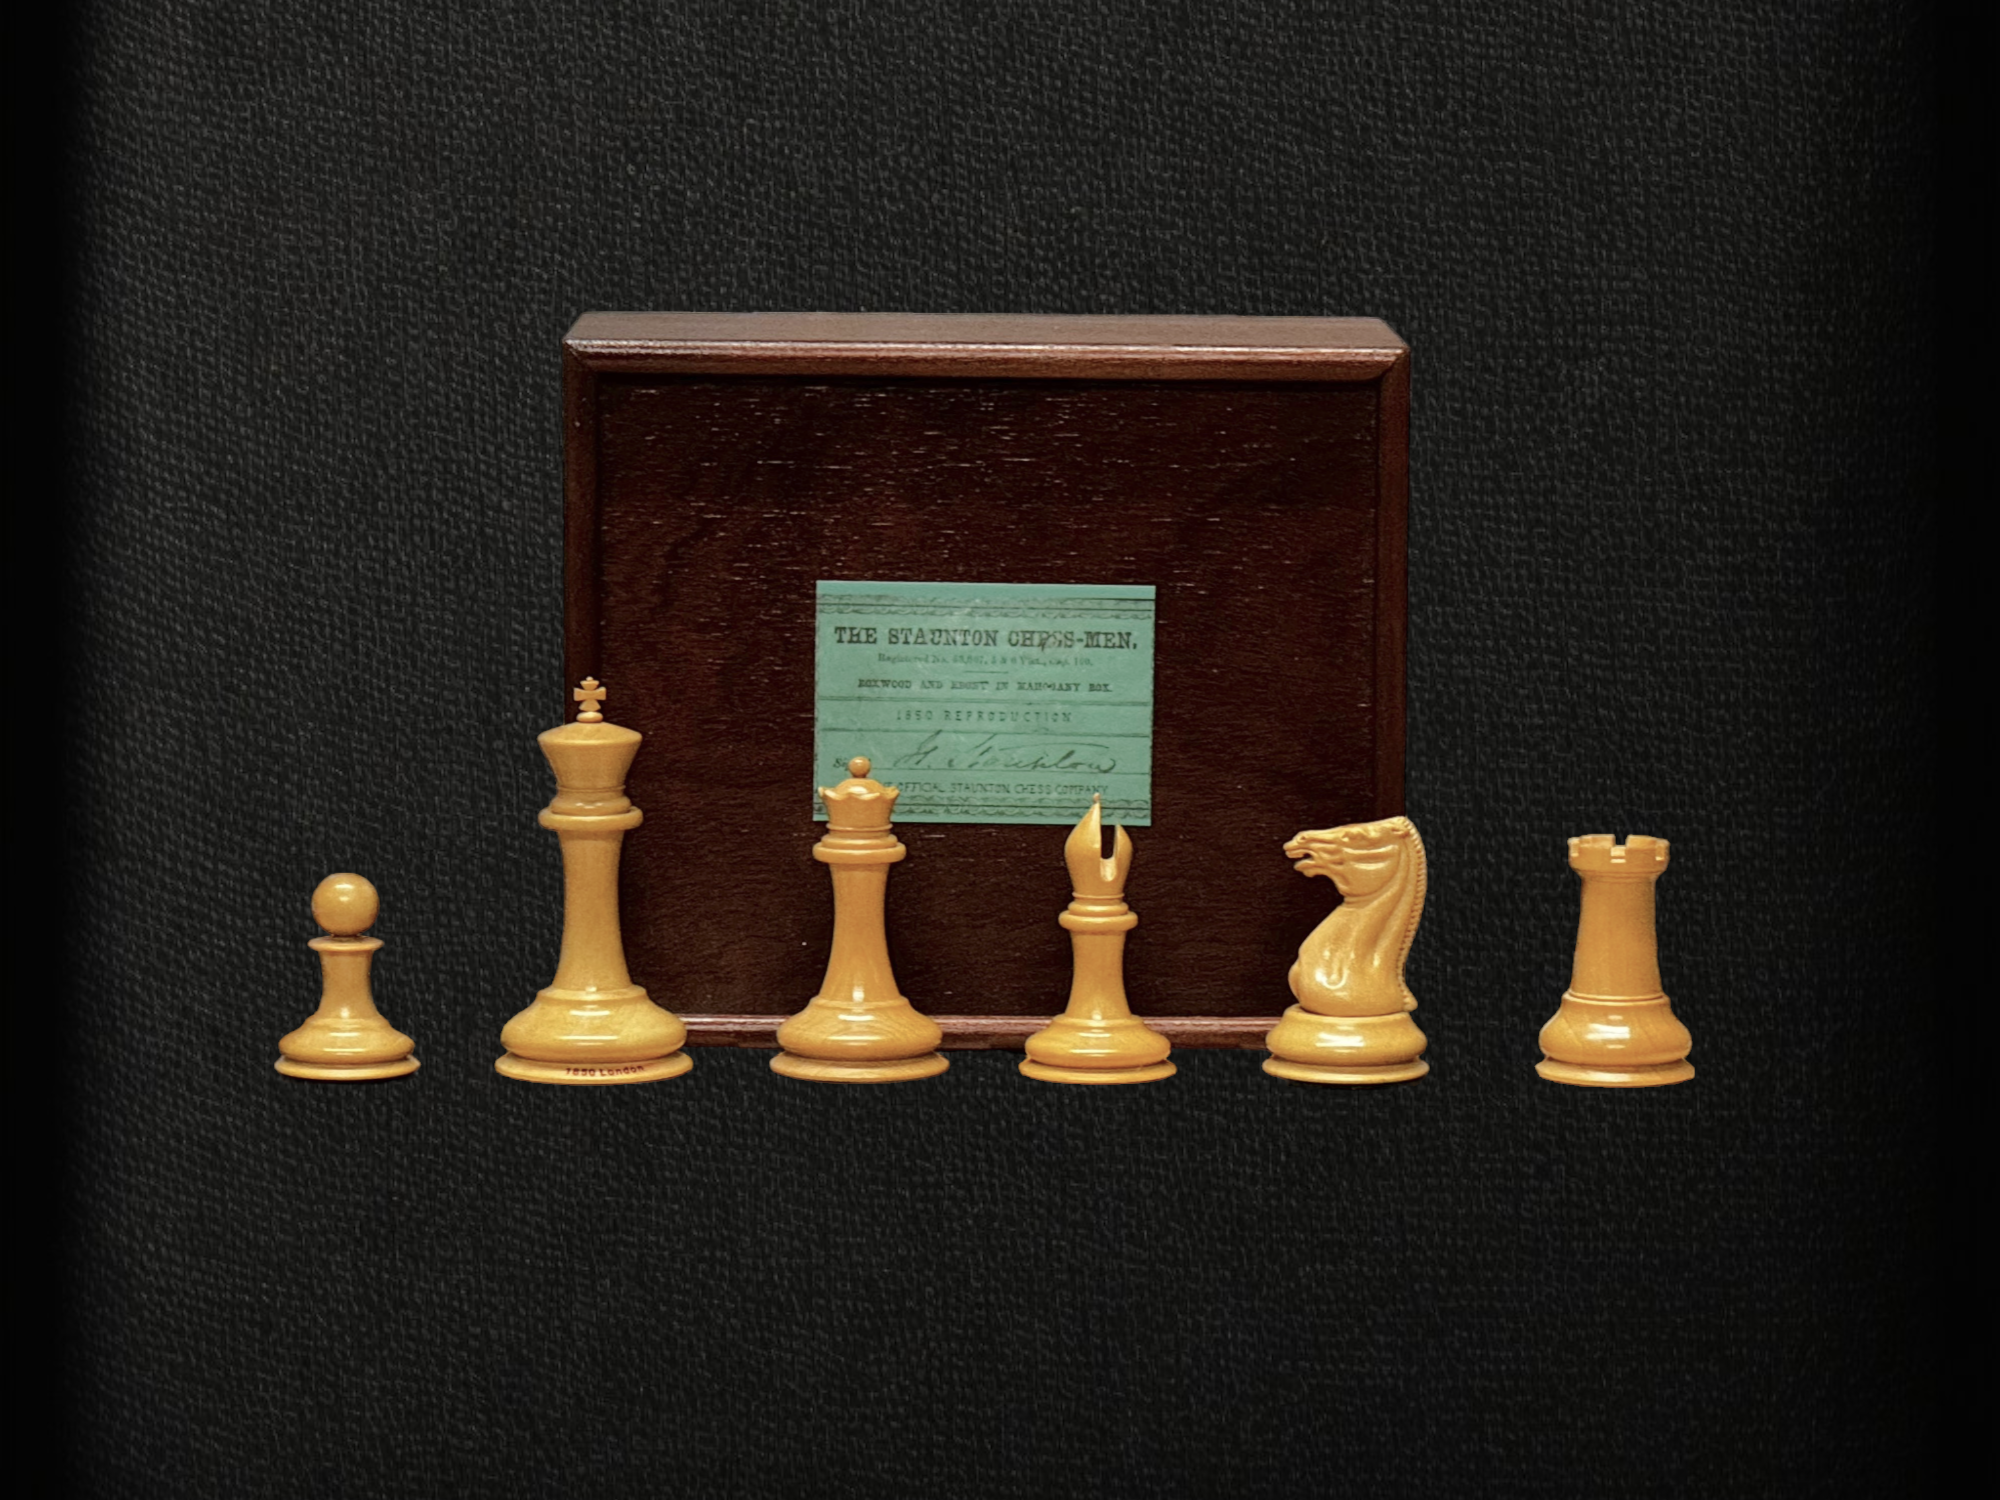 Staunton Style Chess Sets: The Preferred Choice for Tournament Players